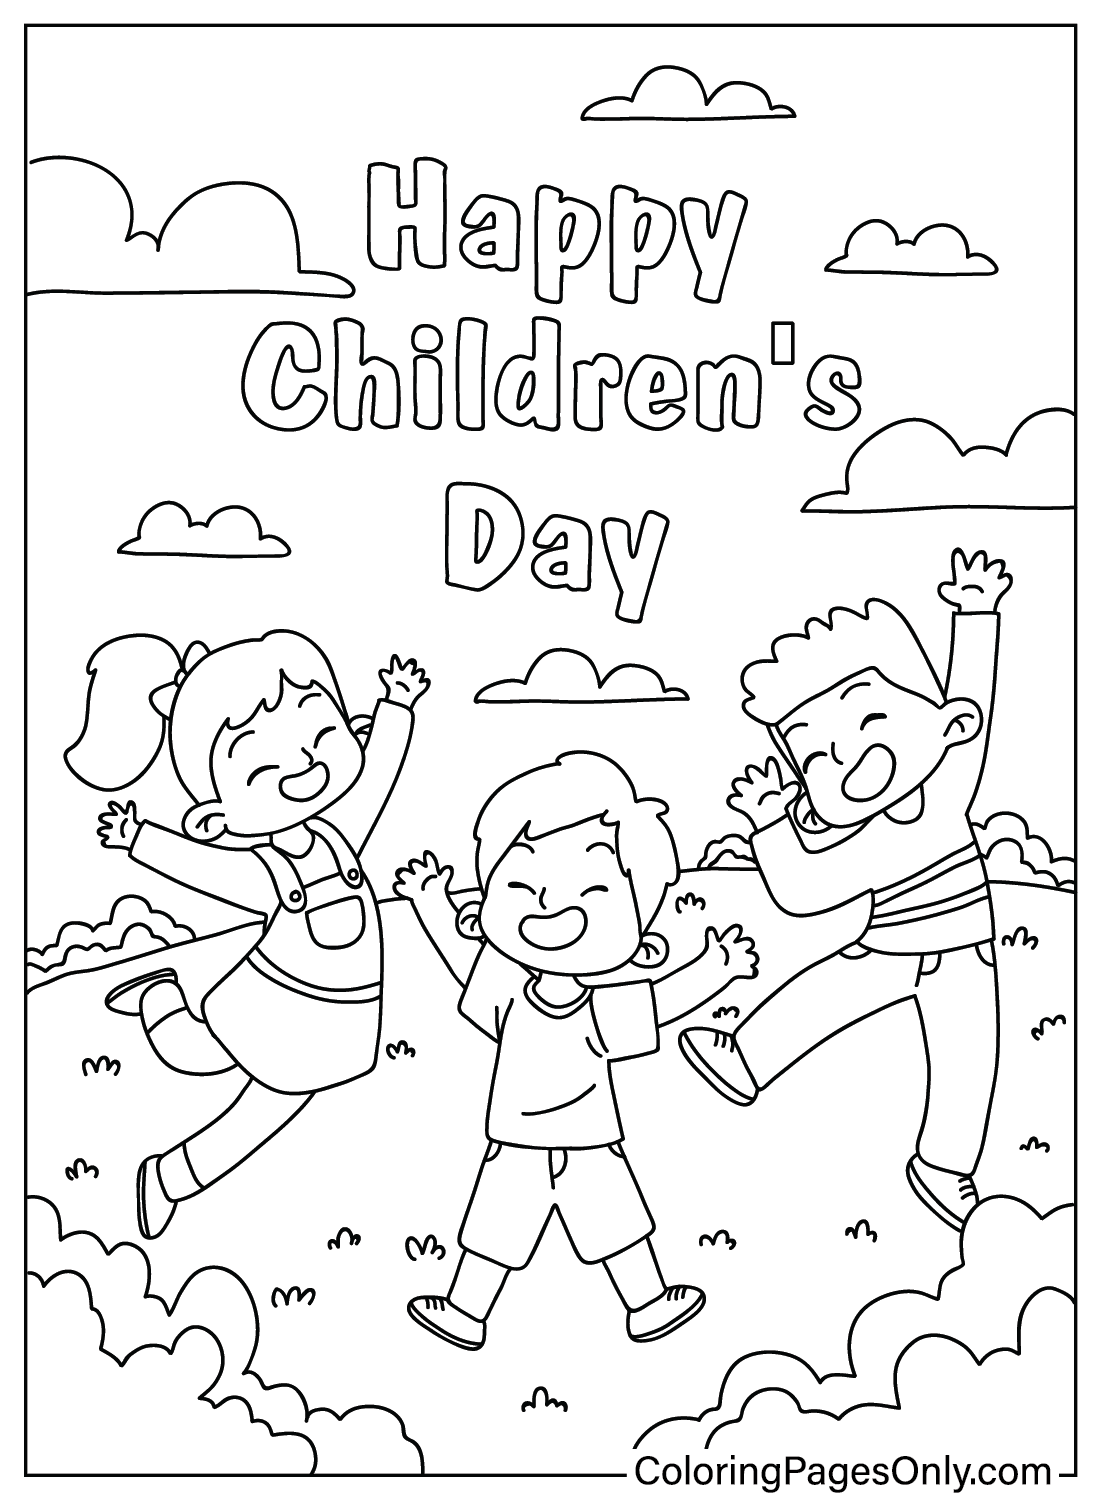 Happy Children’s Day Coloring Page